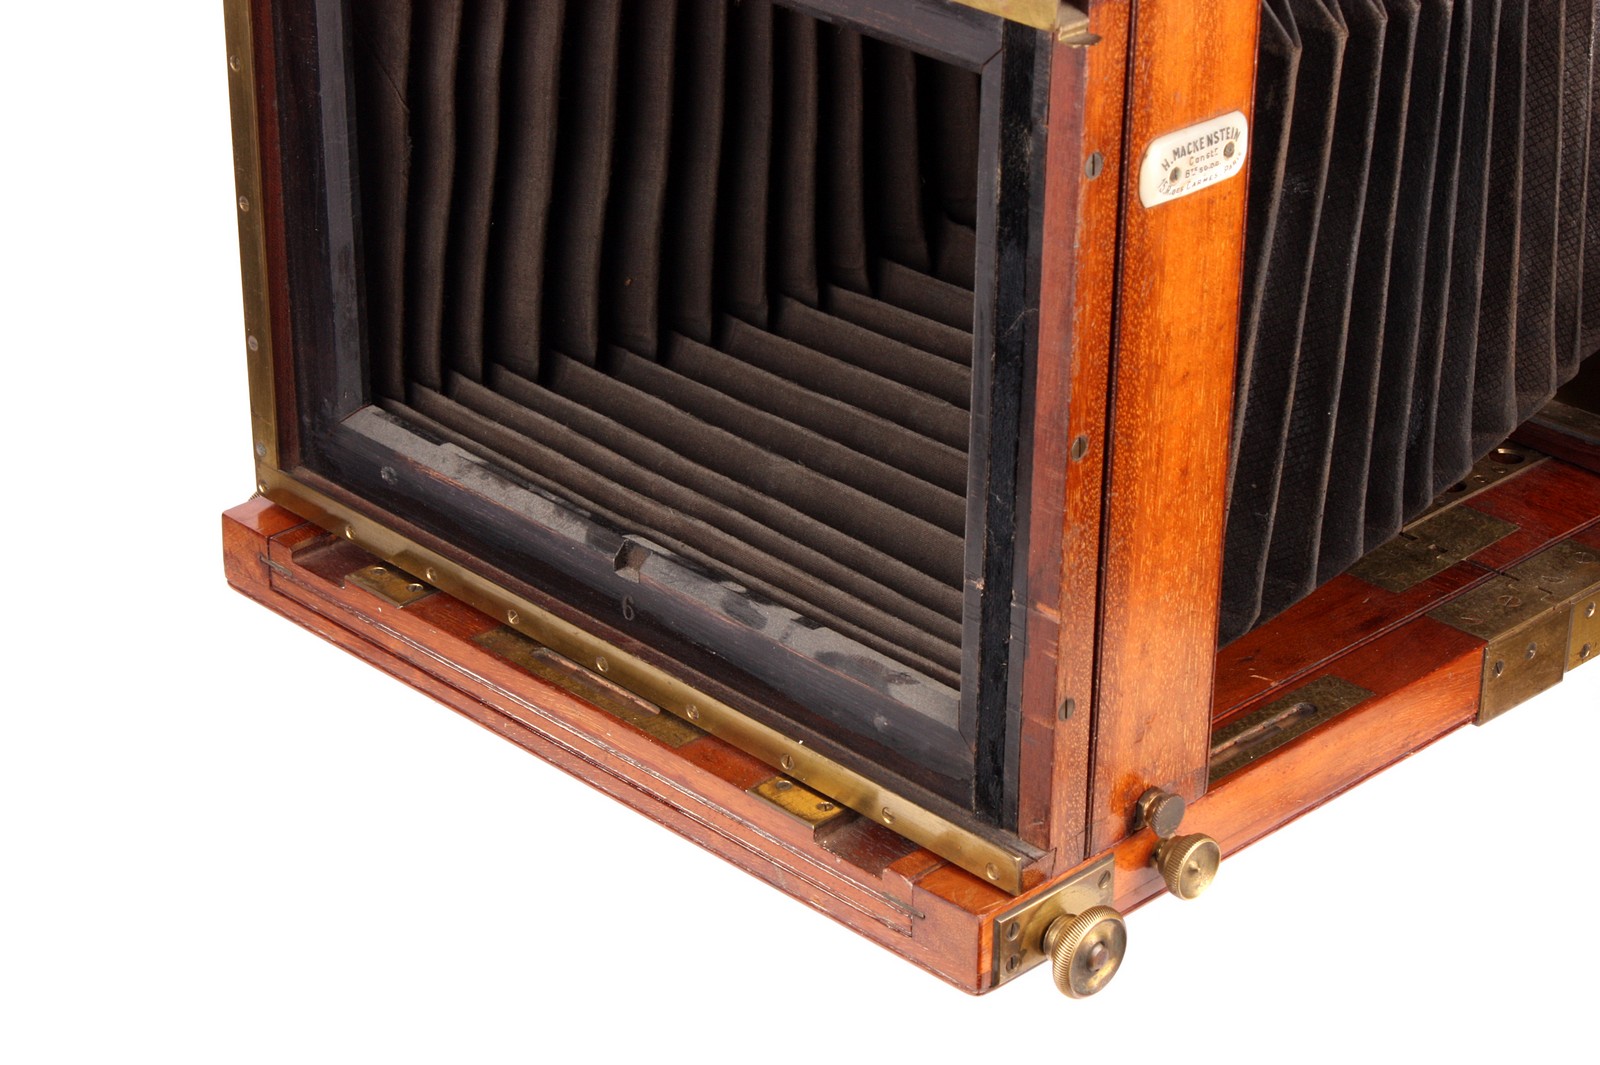 A H. Mackenstein Mahogany Stereo Tailboard Camera, with horizontal and vertical mounting back, 6x8”, - Image 5 of 5